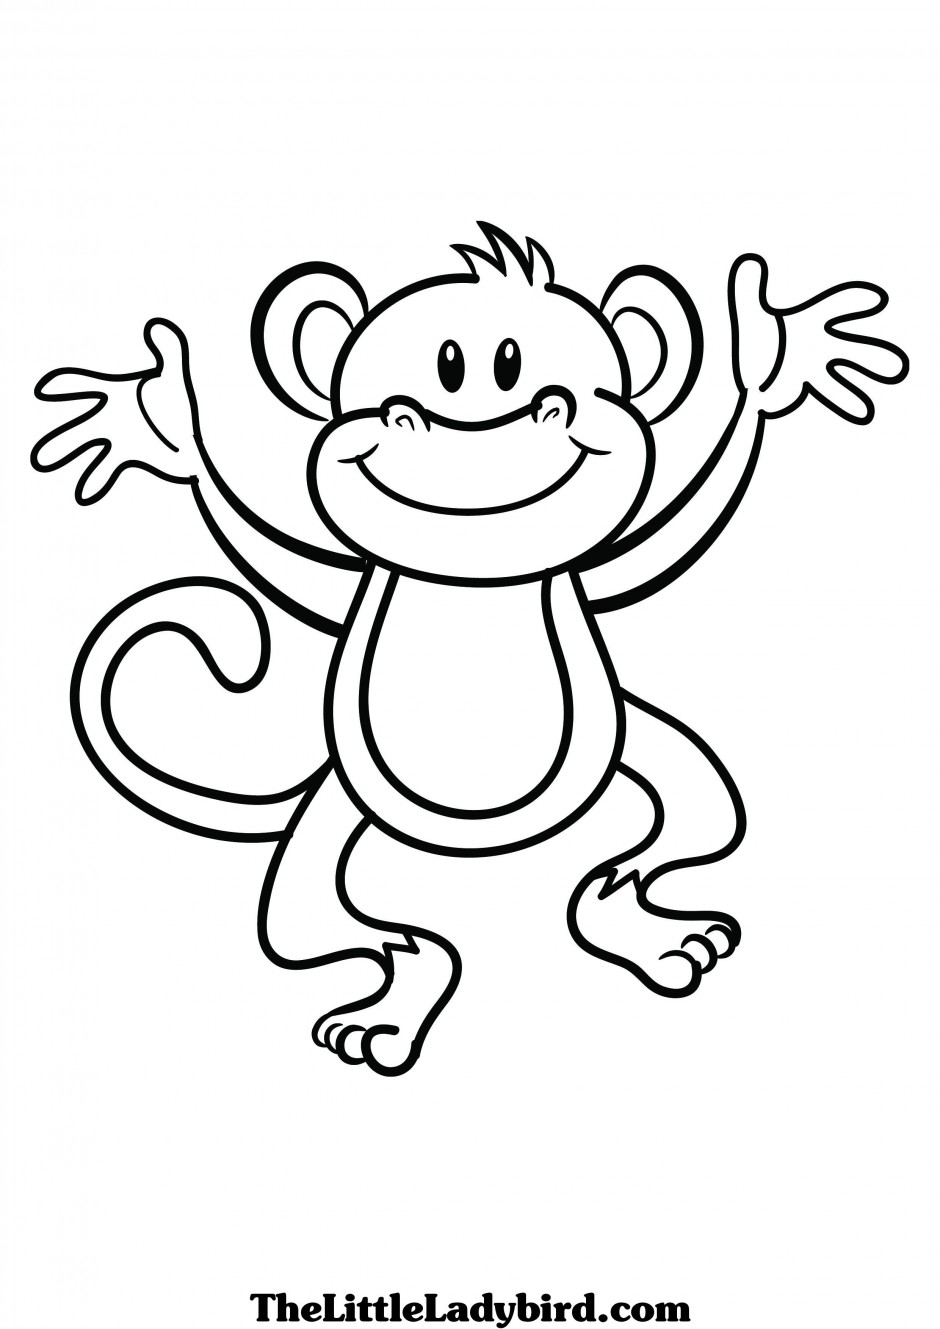 Cute Monkey Black And White Download Png Clipart